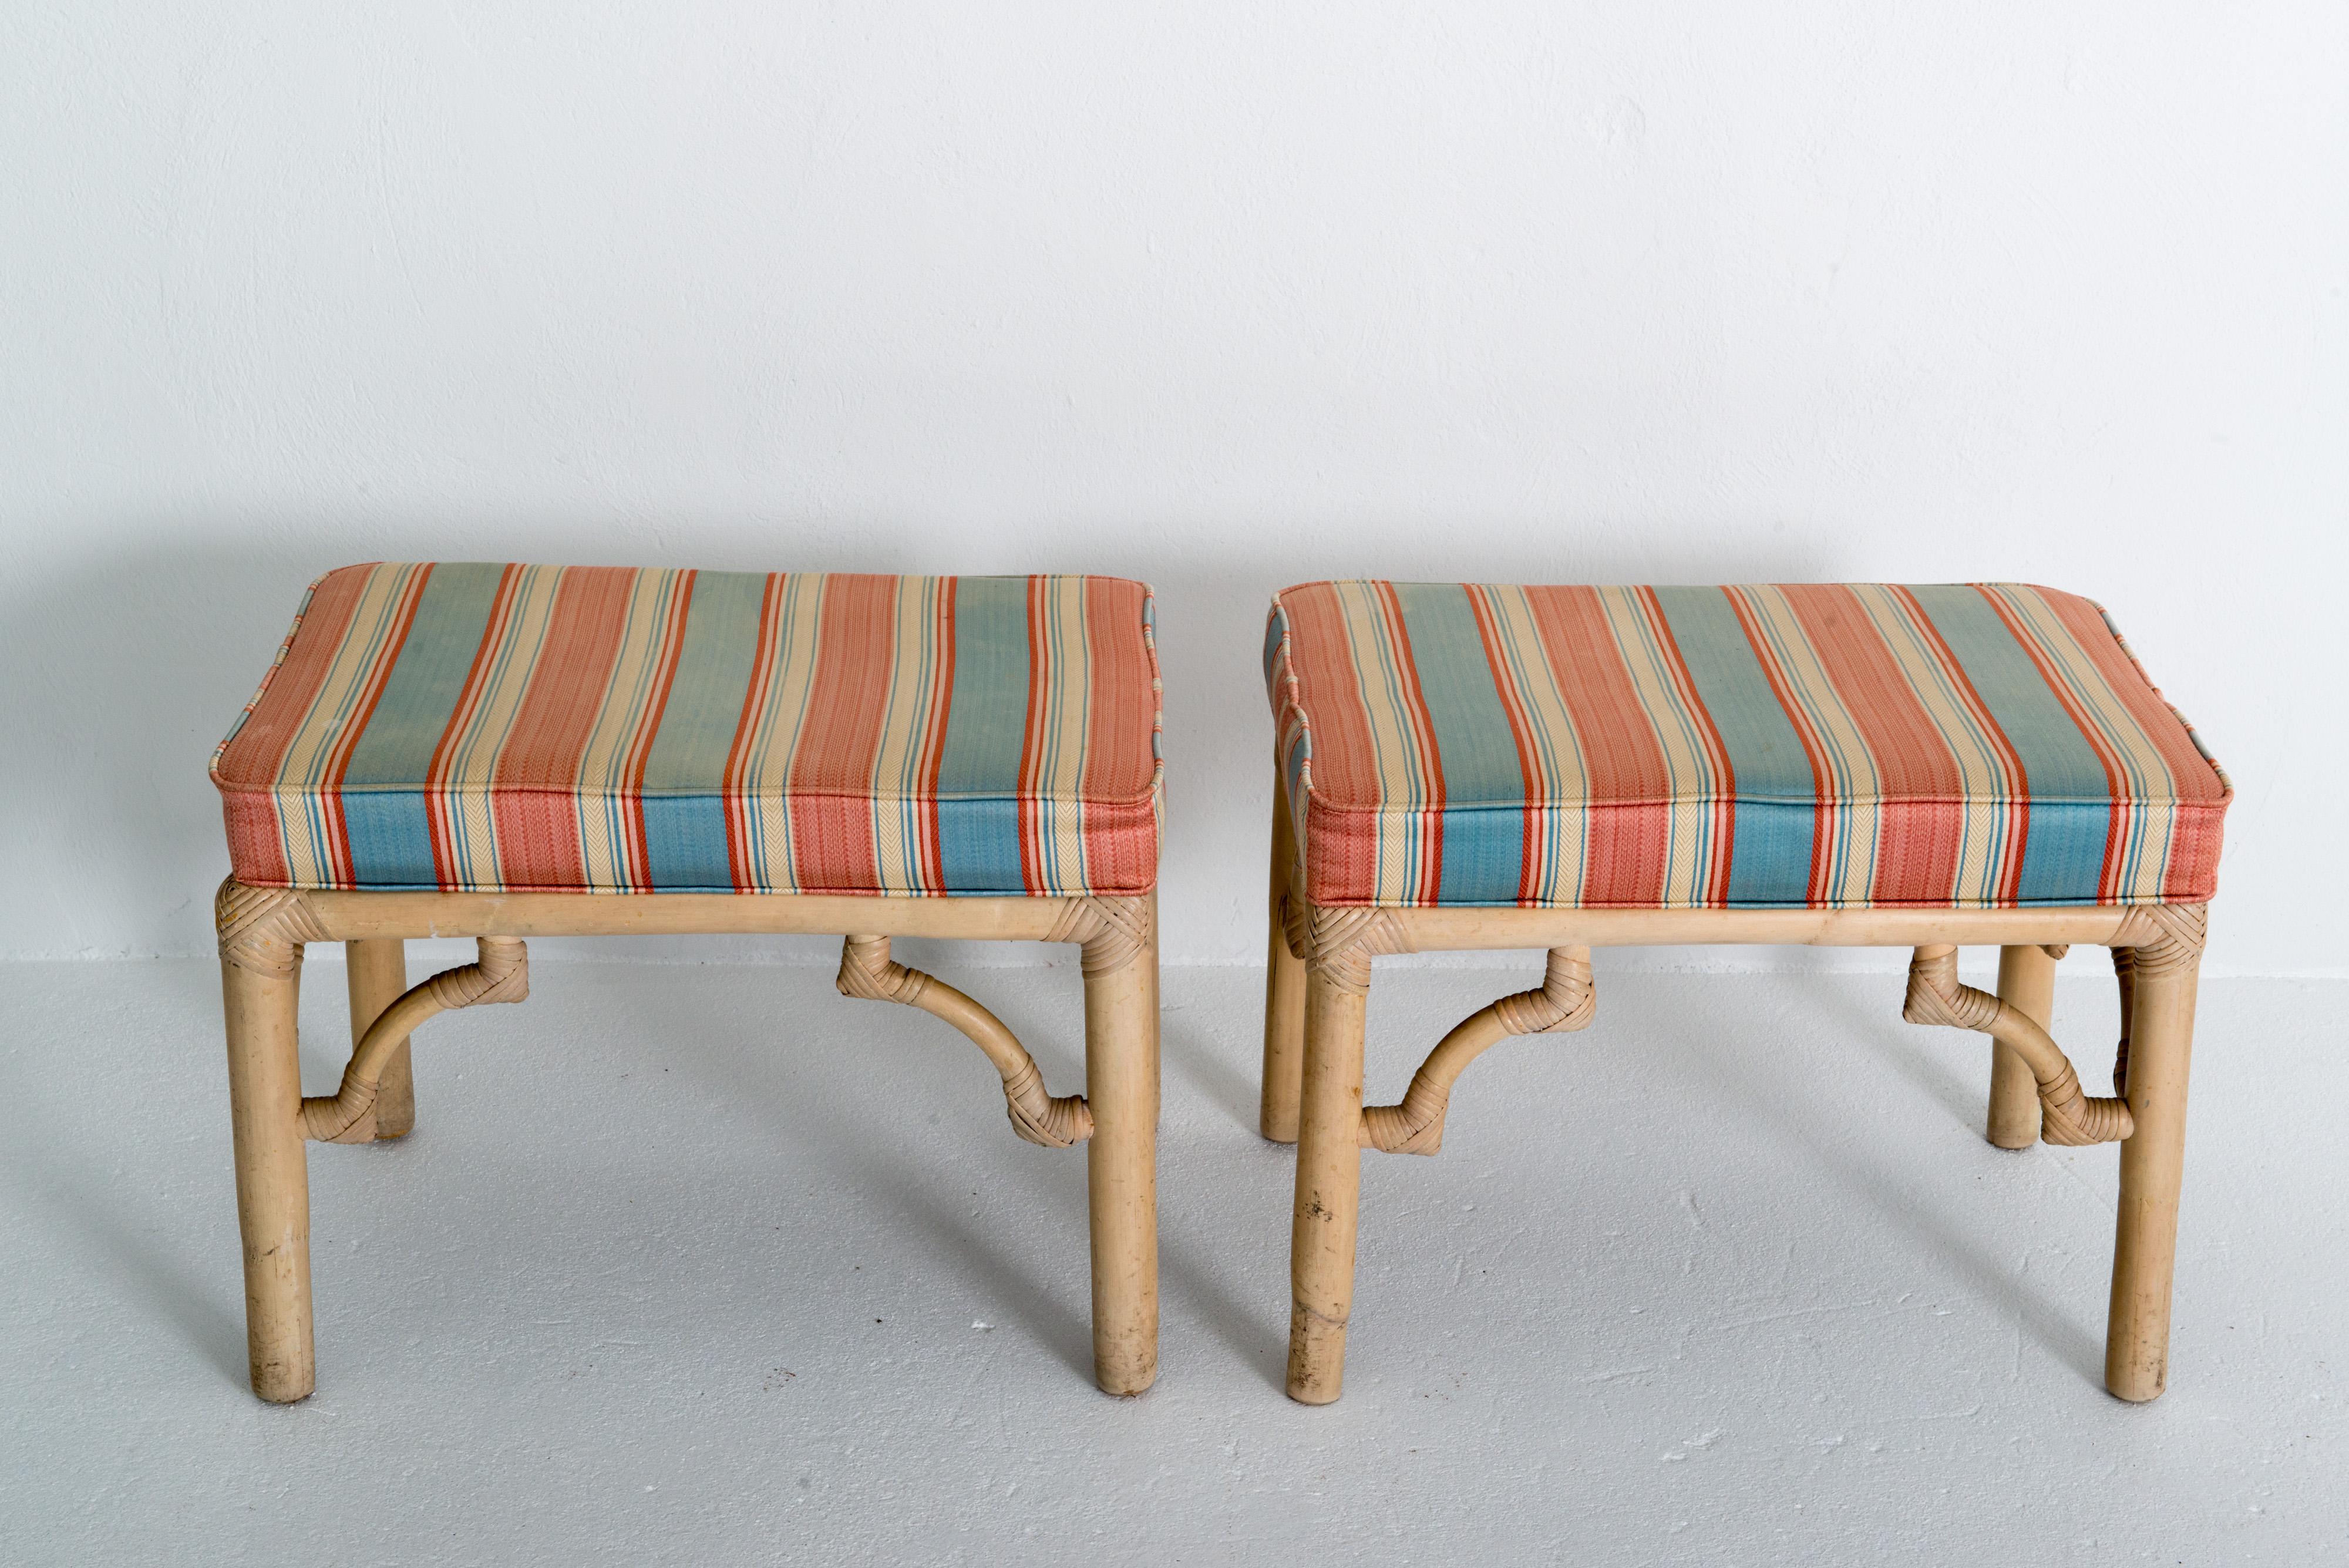 This is a pair of McGuire style benches upholstered with attached box cushions on rectangular chinoiserie rattan bases. 1960s era. In very good condition.